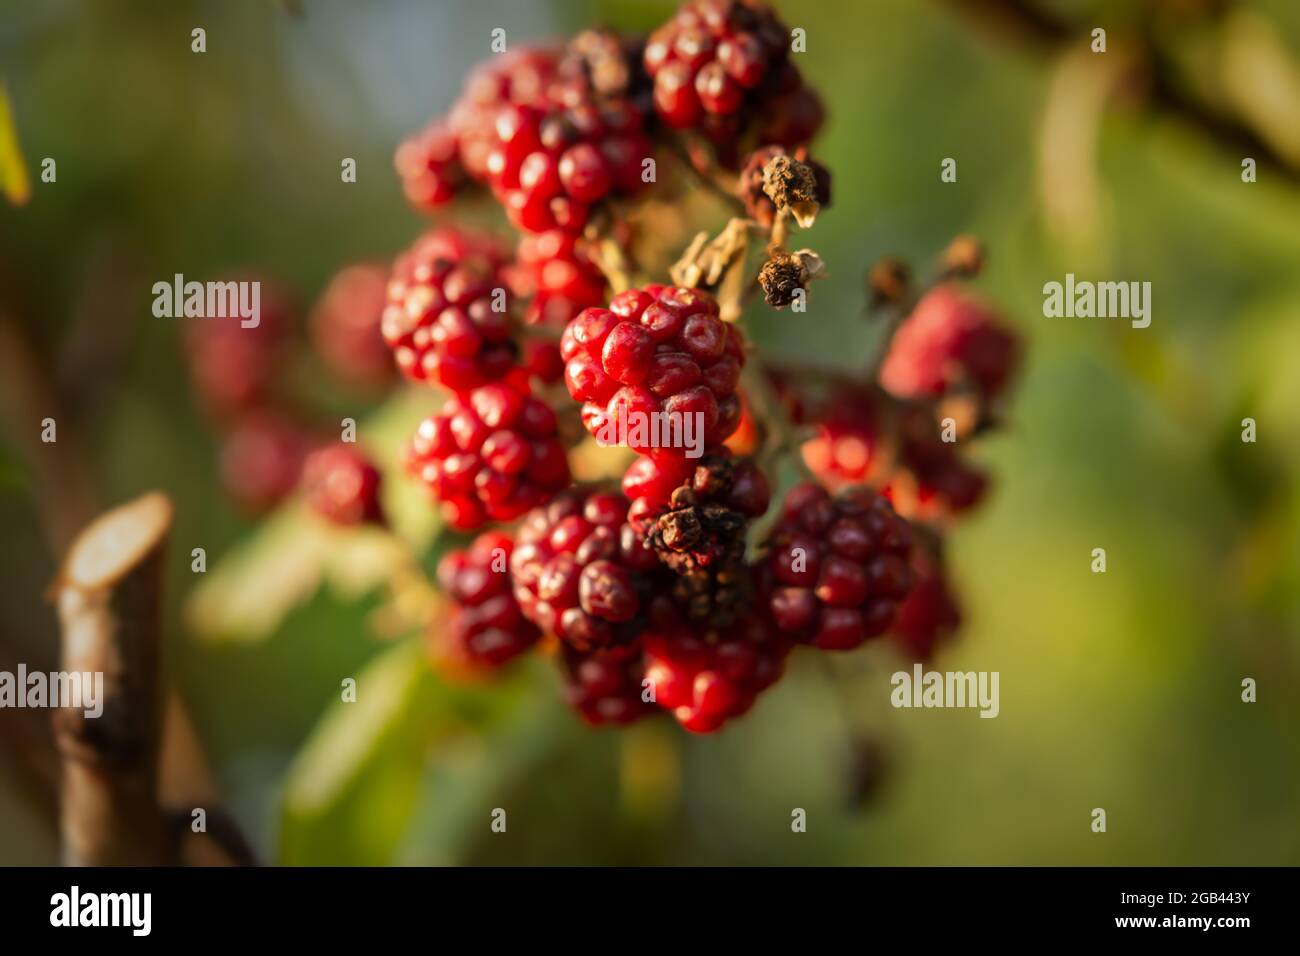 Blackberry bush close-up on a blurry background. The concept of summer, summer fruits and berries, vitamins and healthy nutrition. Ripe blackberries o Stock Photo